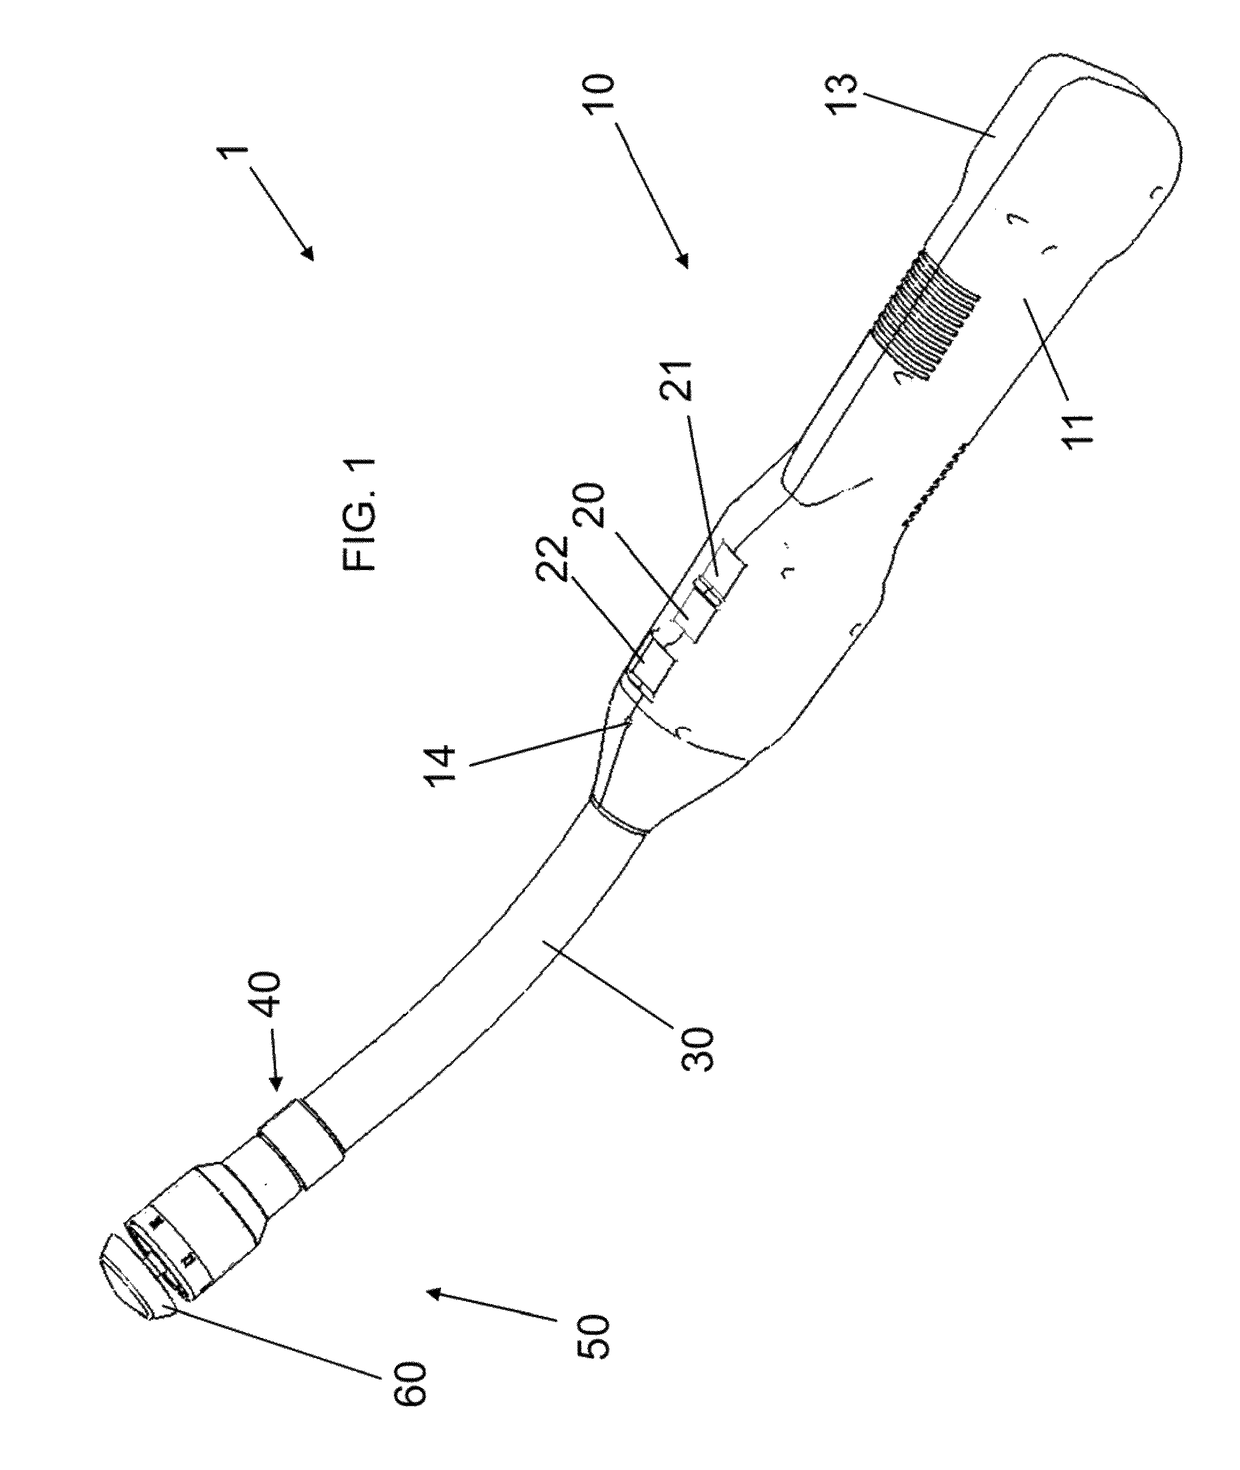 Electrically self-powered surgical instrument with cryptographic identification of interchangeable part